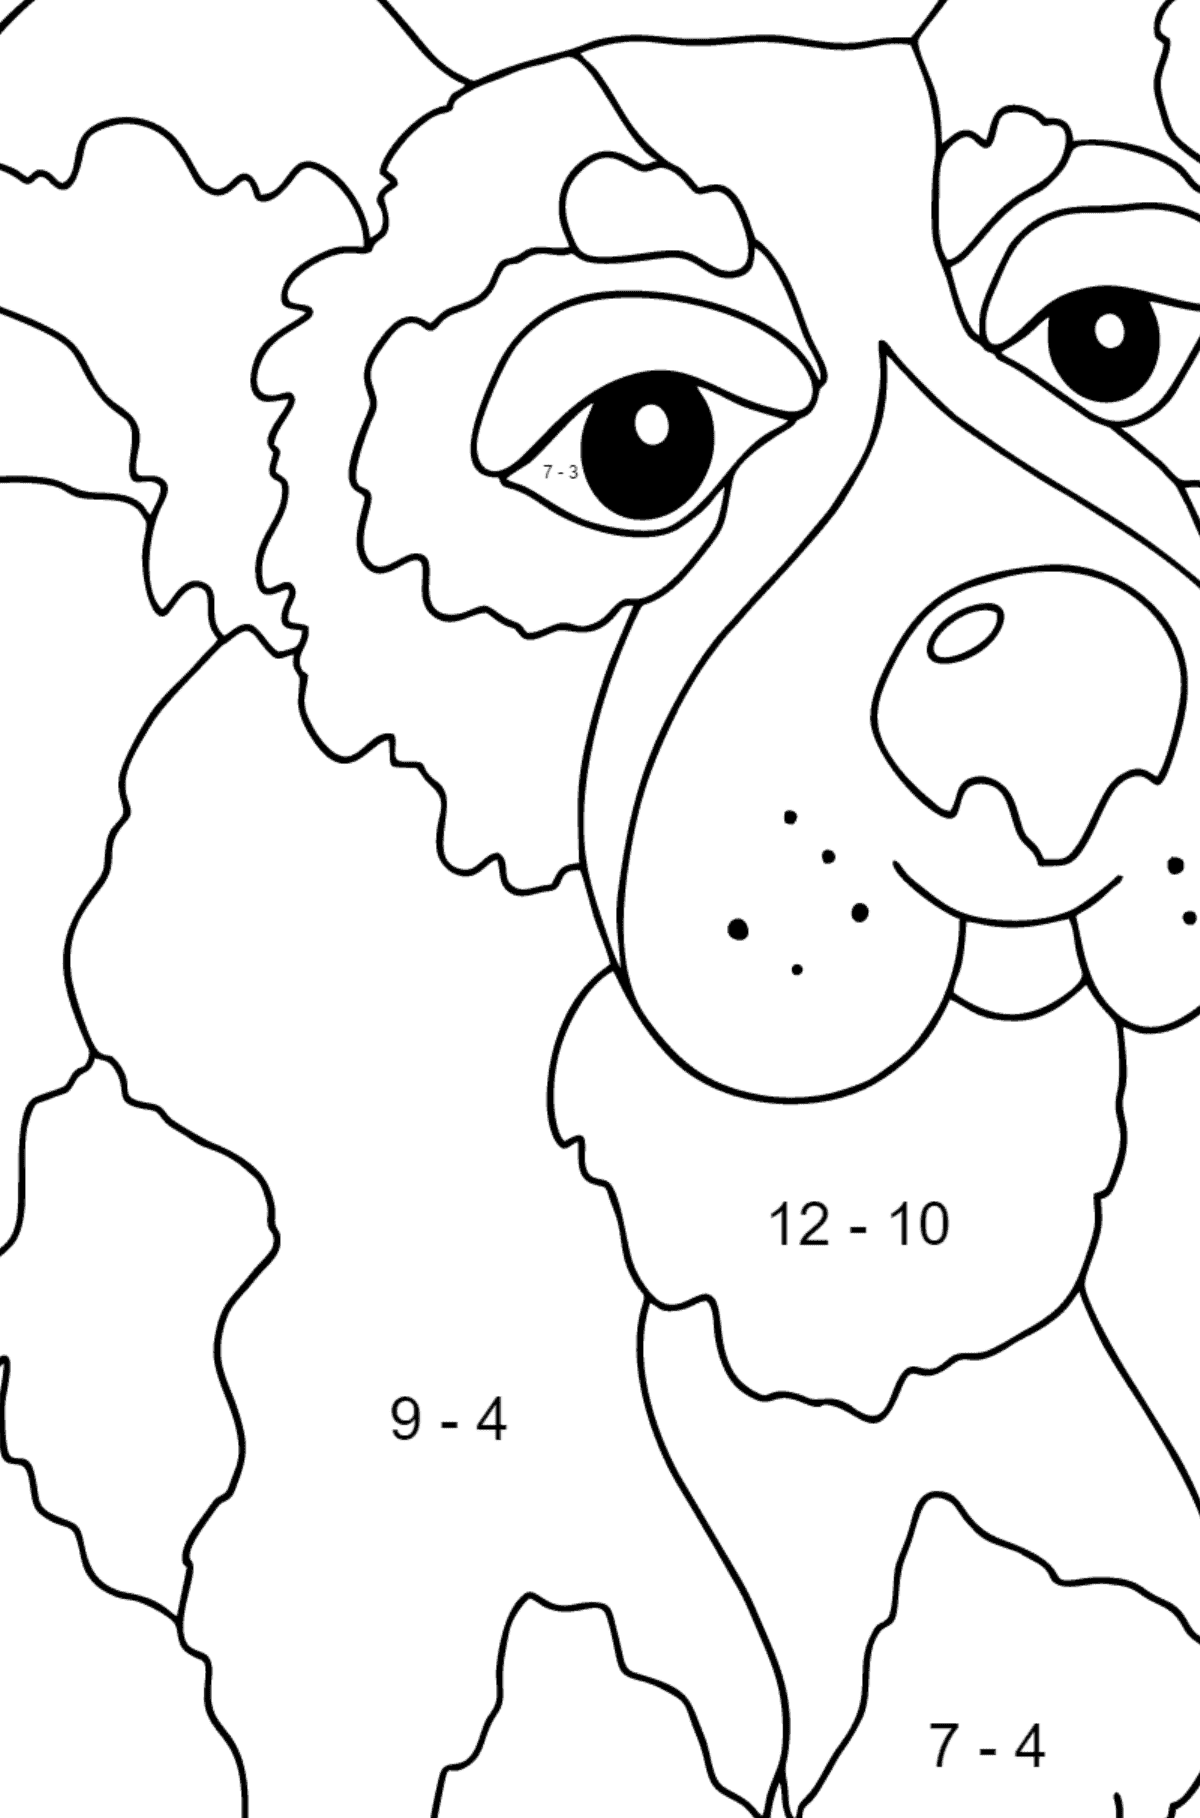 Coloring Page - A Dog is Jumping with a Blue Ball for Children  - Color by Number Substraction